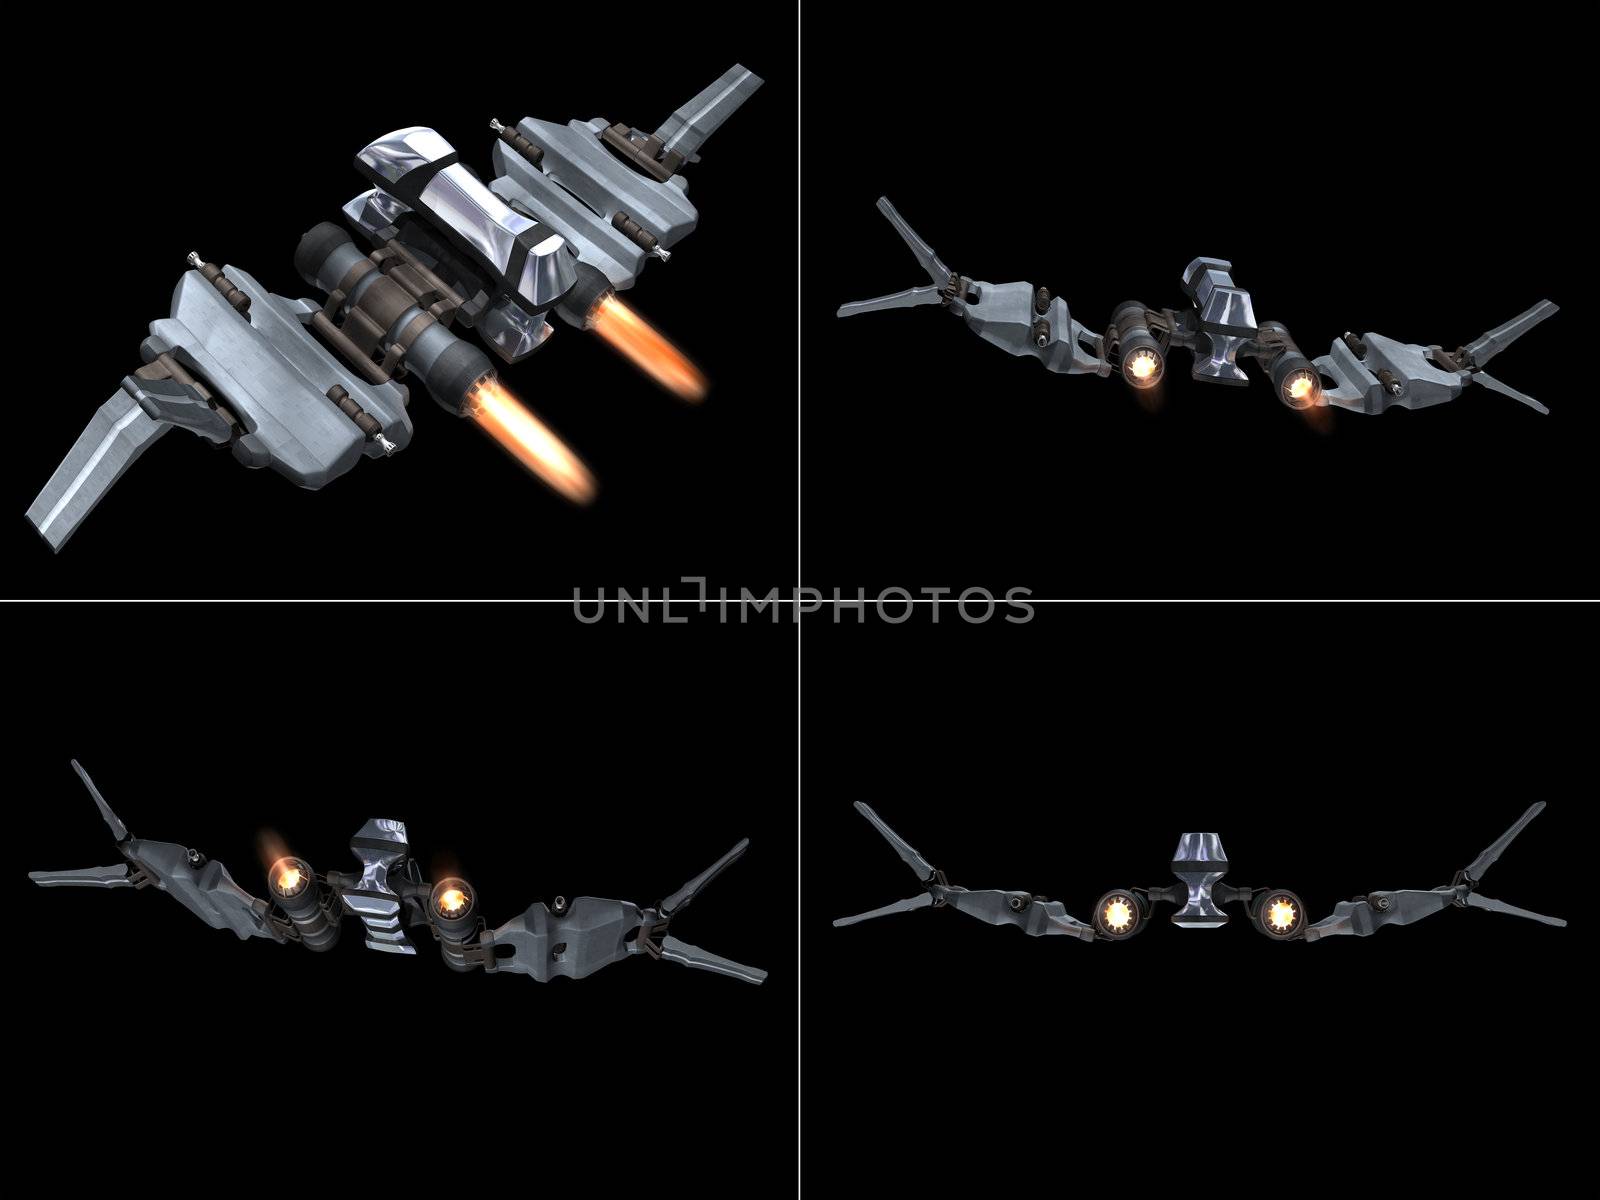 Four back views of a StarFighter in action with a black background